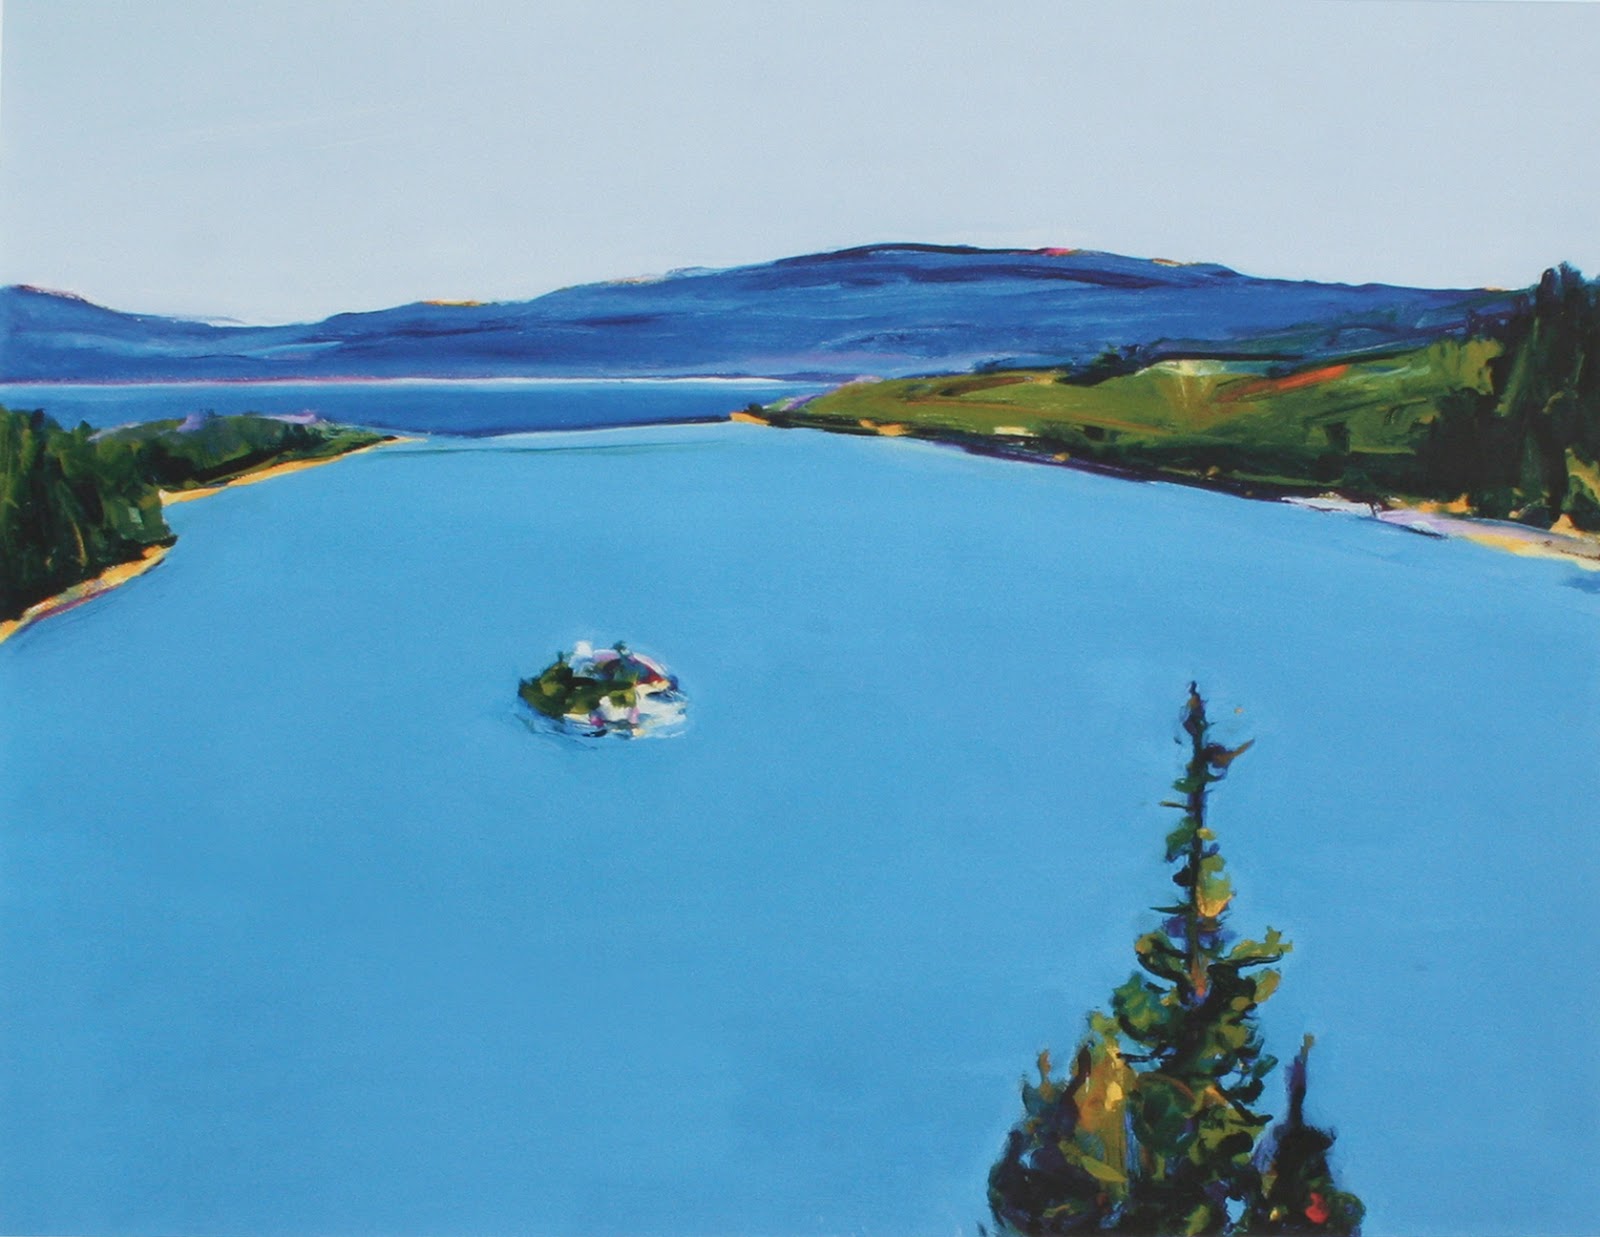 Emerald Bay - Giclee on paper - 20 X 25.5 - Available